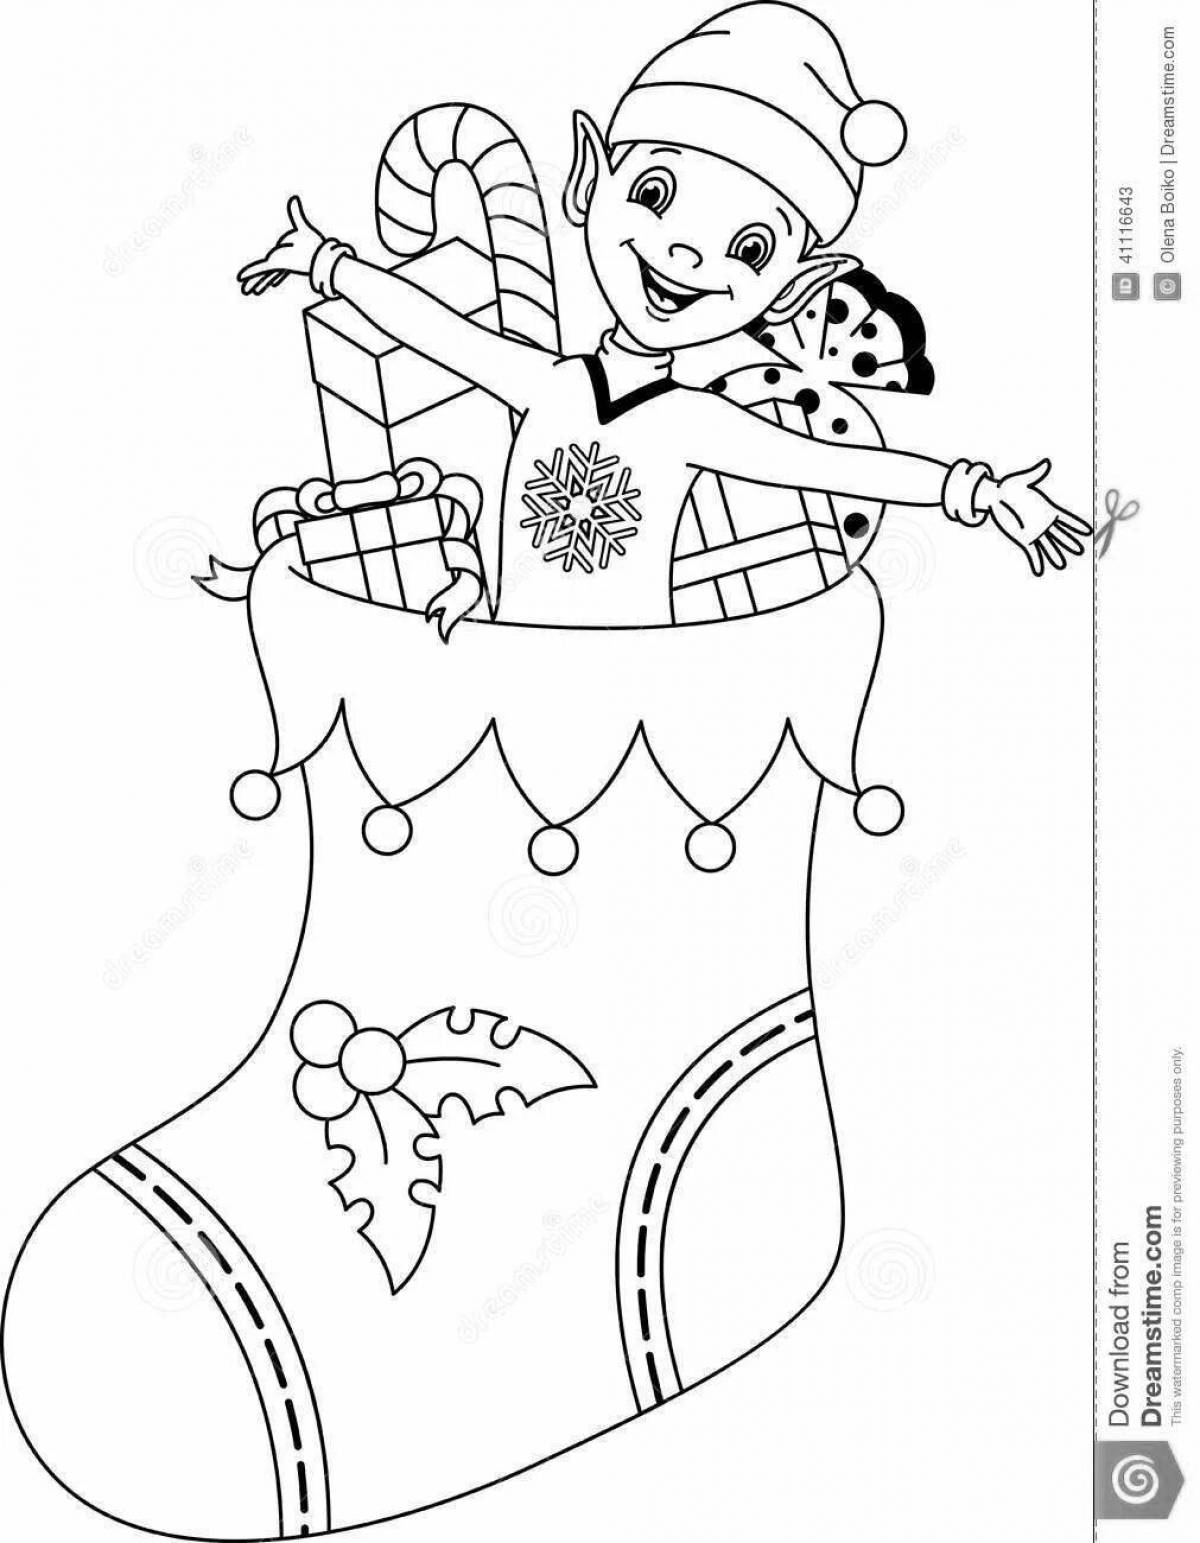 Grinning christmas elf coloring book